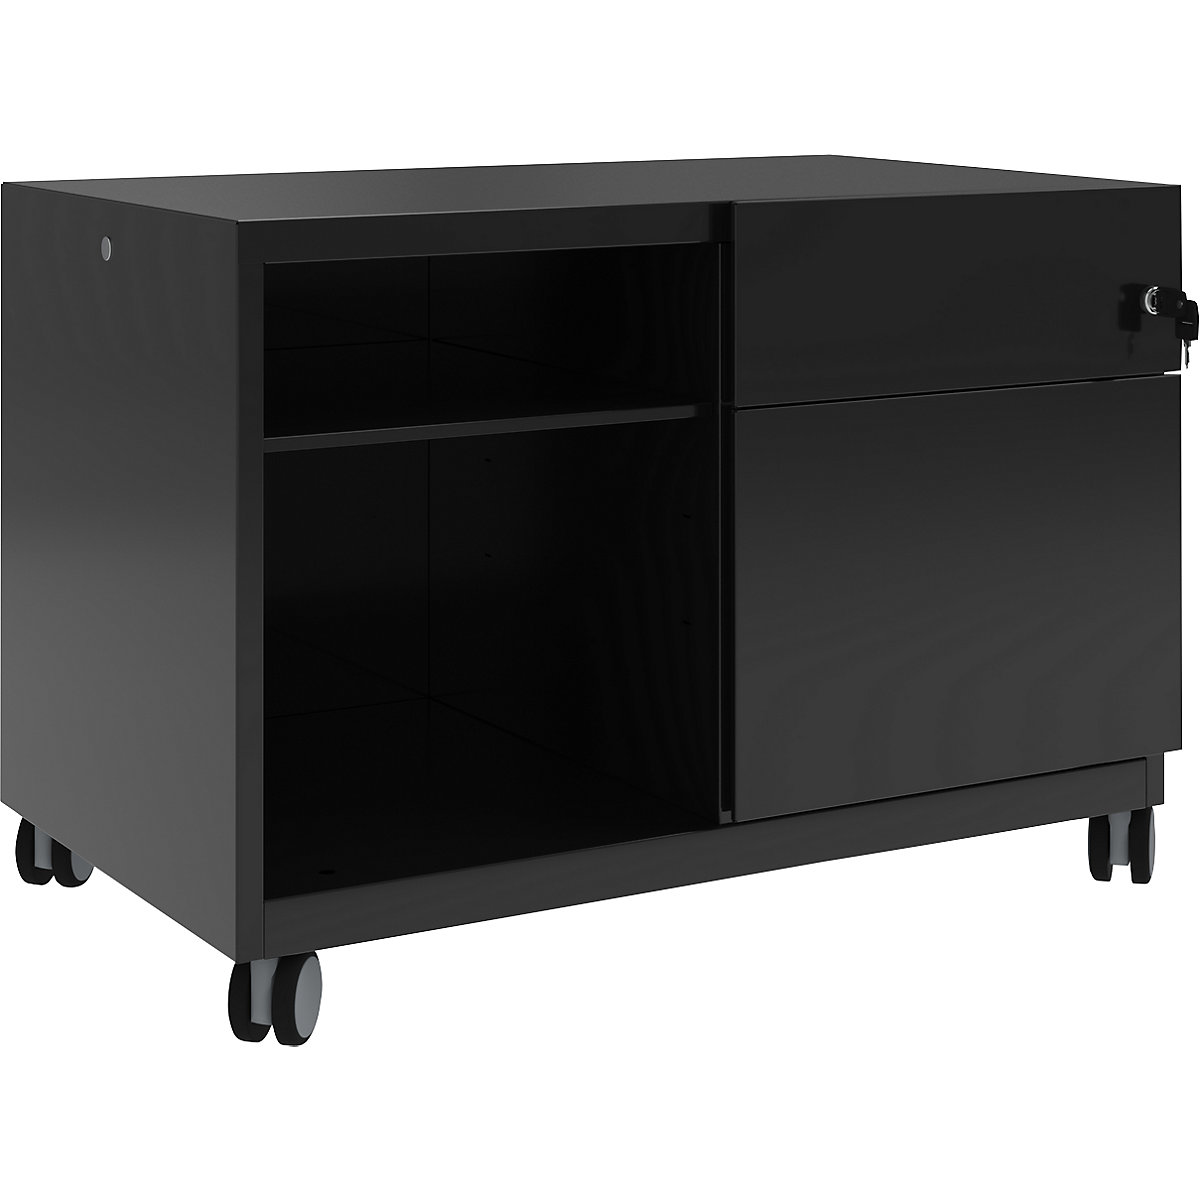 Note™ CADDY, HxBxT 563 x 800 x 490 mm – BISLEY, 1 universal drawer and suspension file drawer on the right, black-18